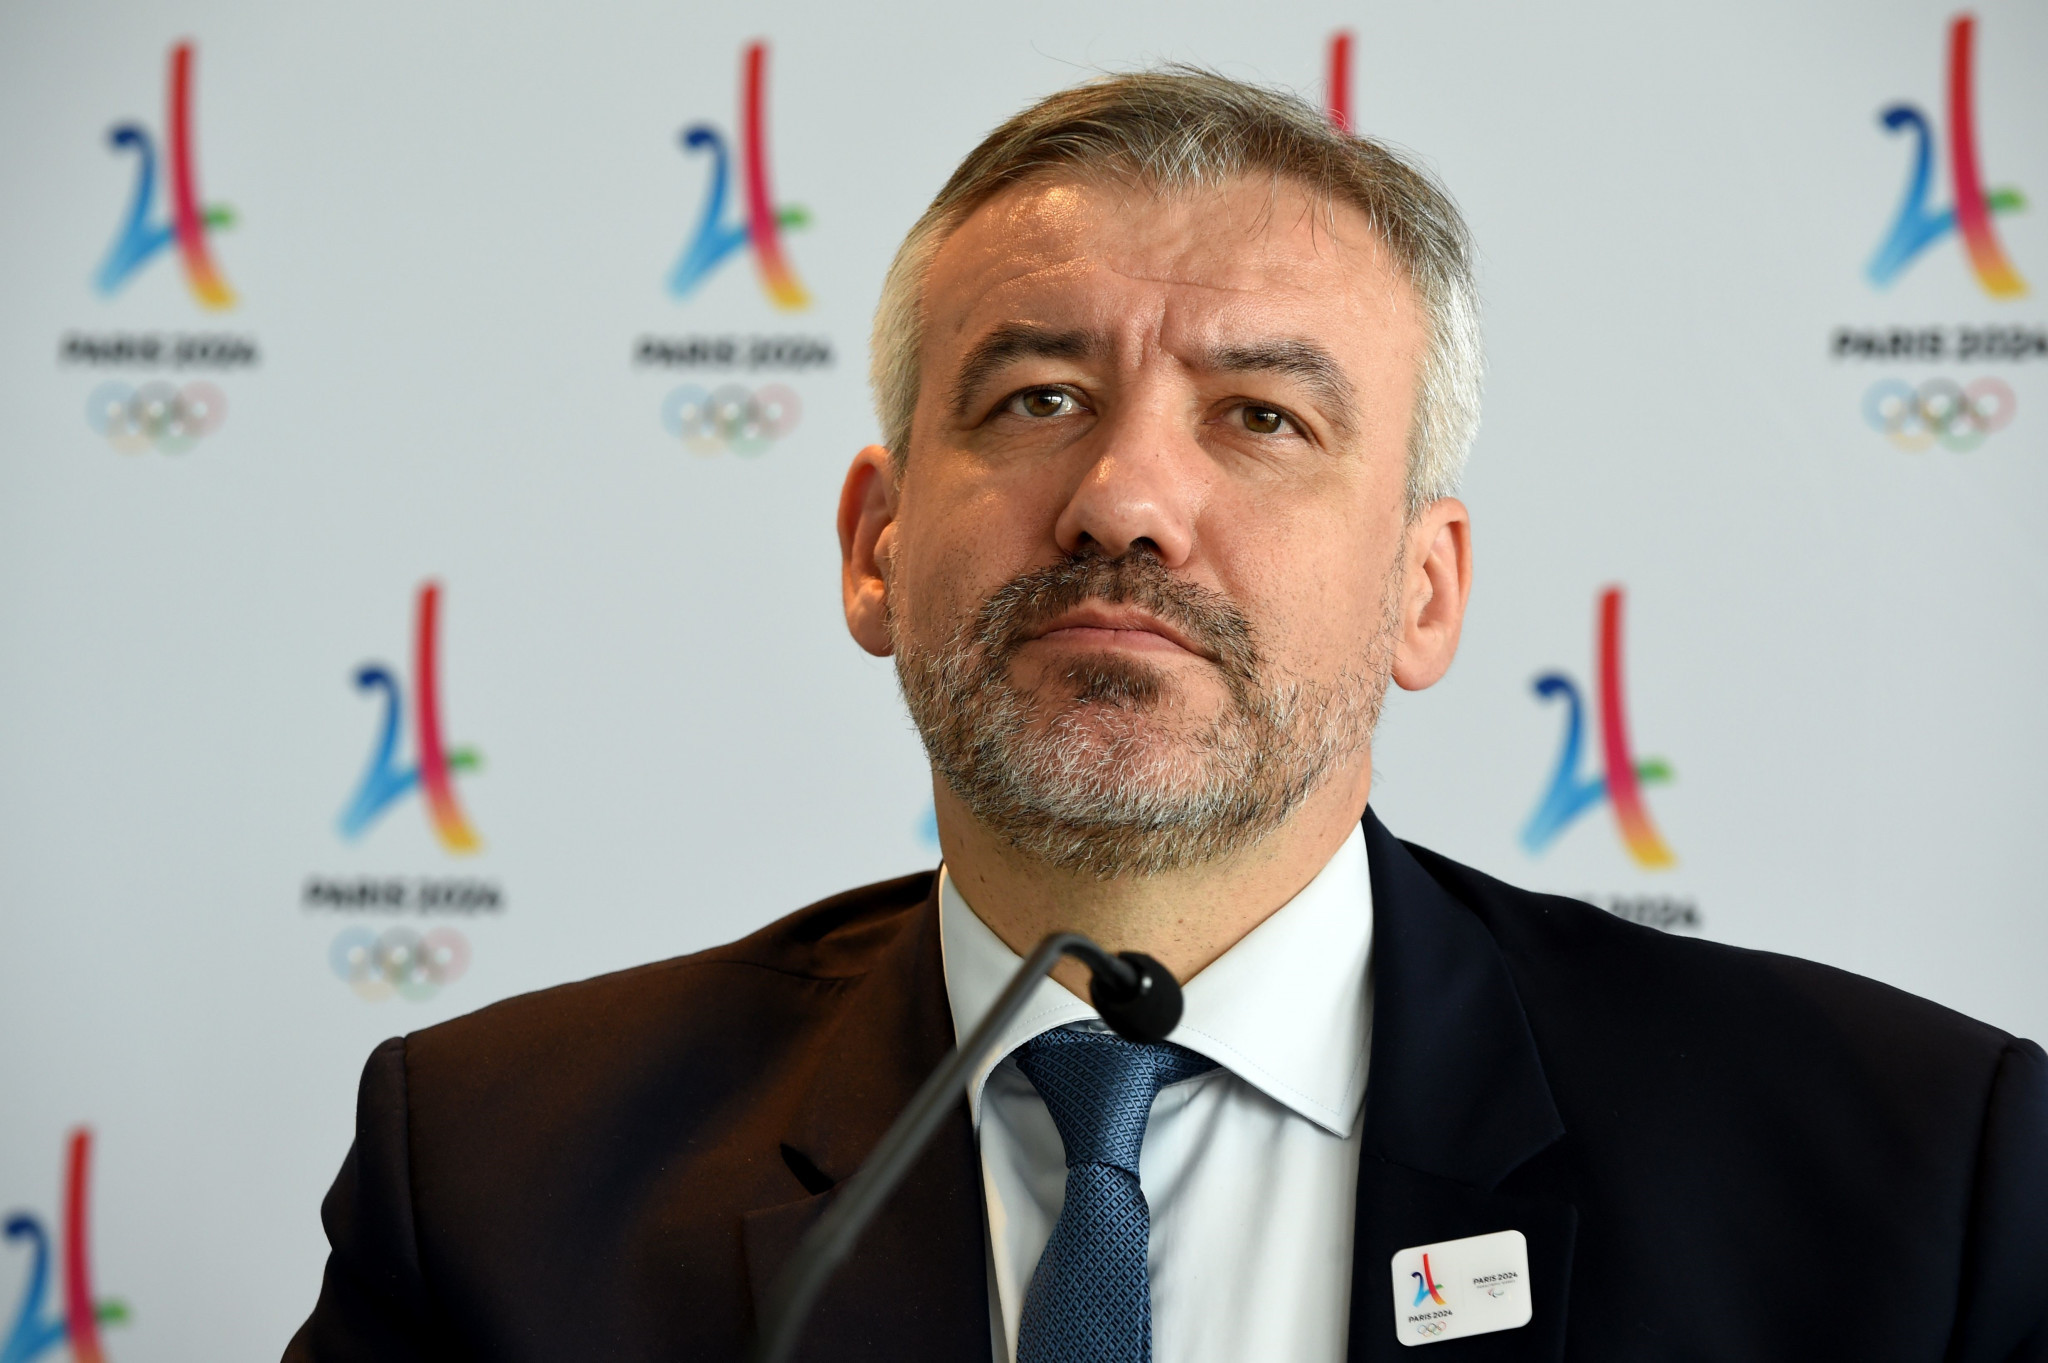 Paris 2024 chief executive Etienne Thobois suggested cuts were coming to transport and renting of venues ©Getty Images